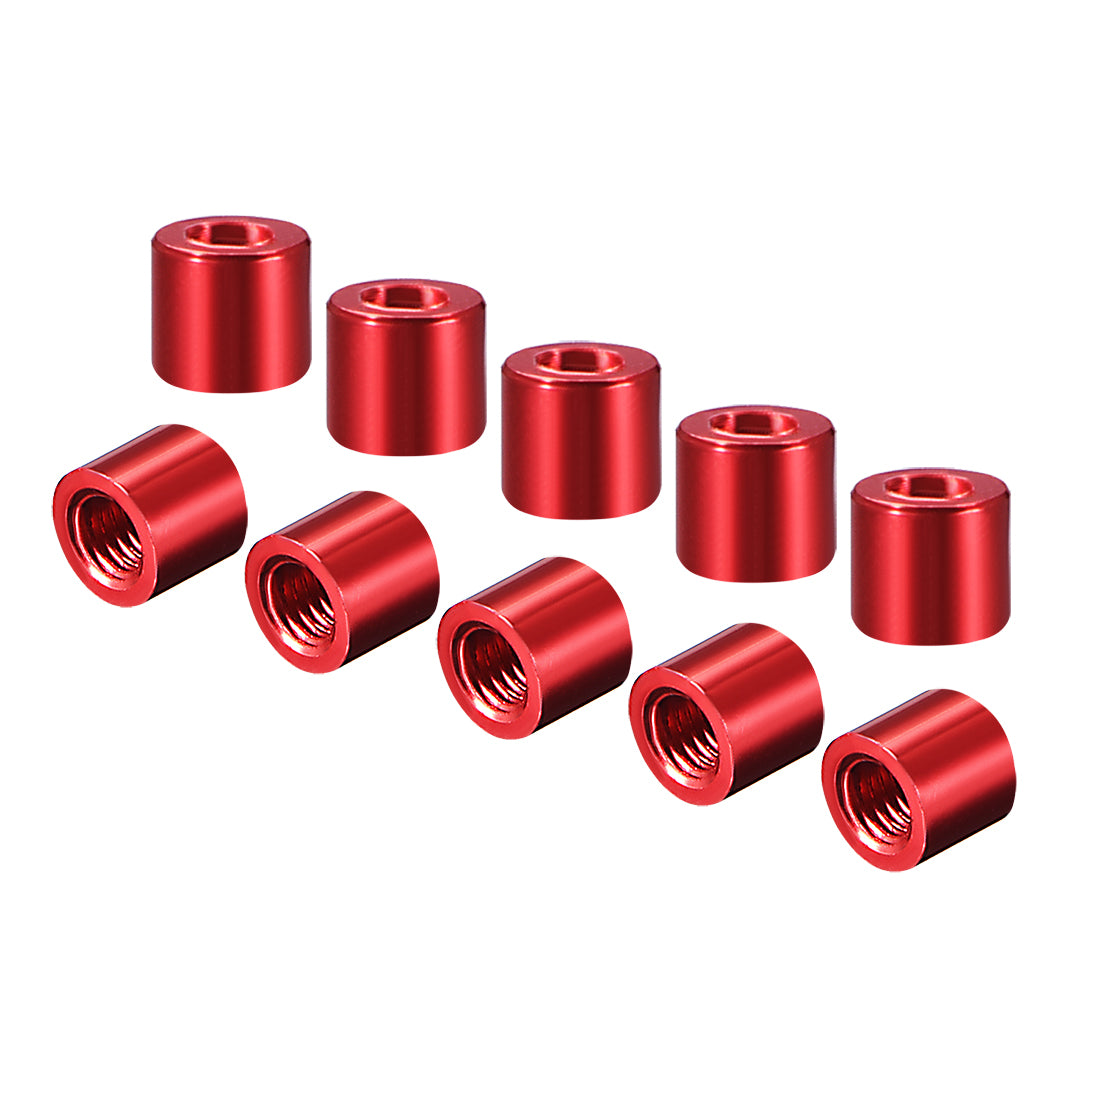 uxcell Uxcell Round Aluminum Standoff Column Spacer M3x5mm,for RC Airplane,FPV Quadcopter,CNC,Red,10pcs